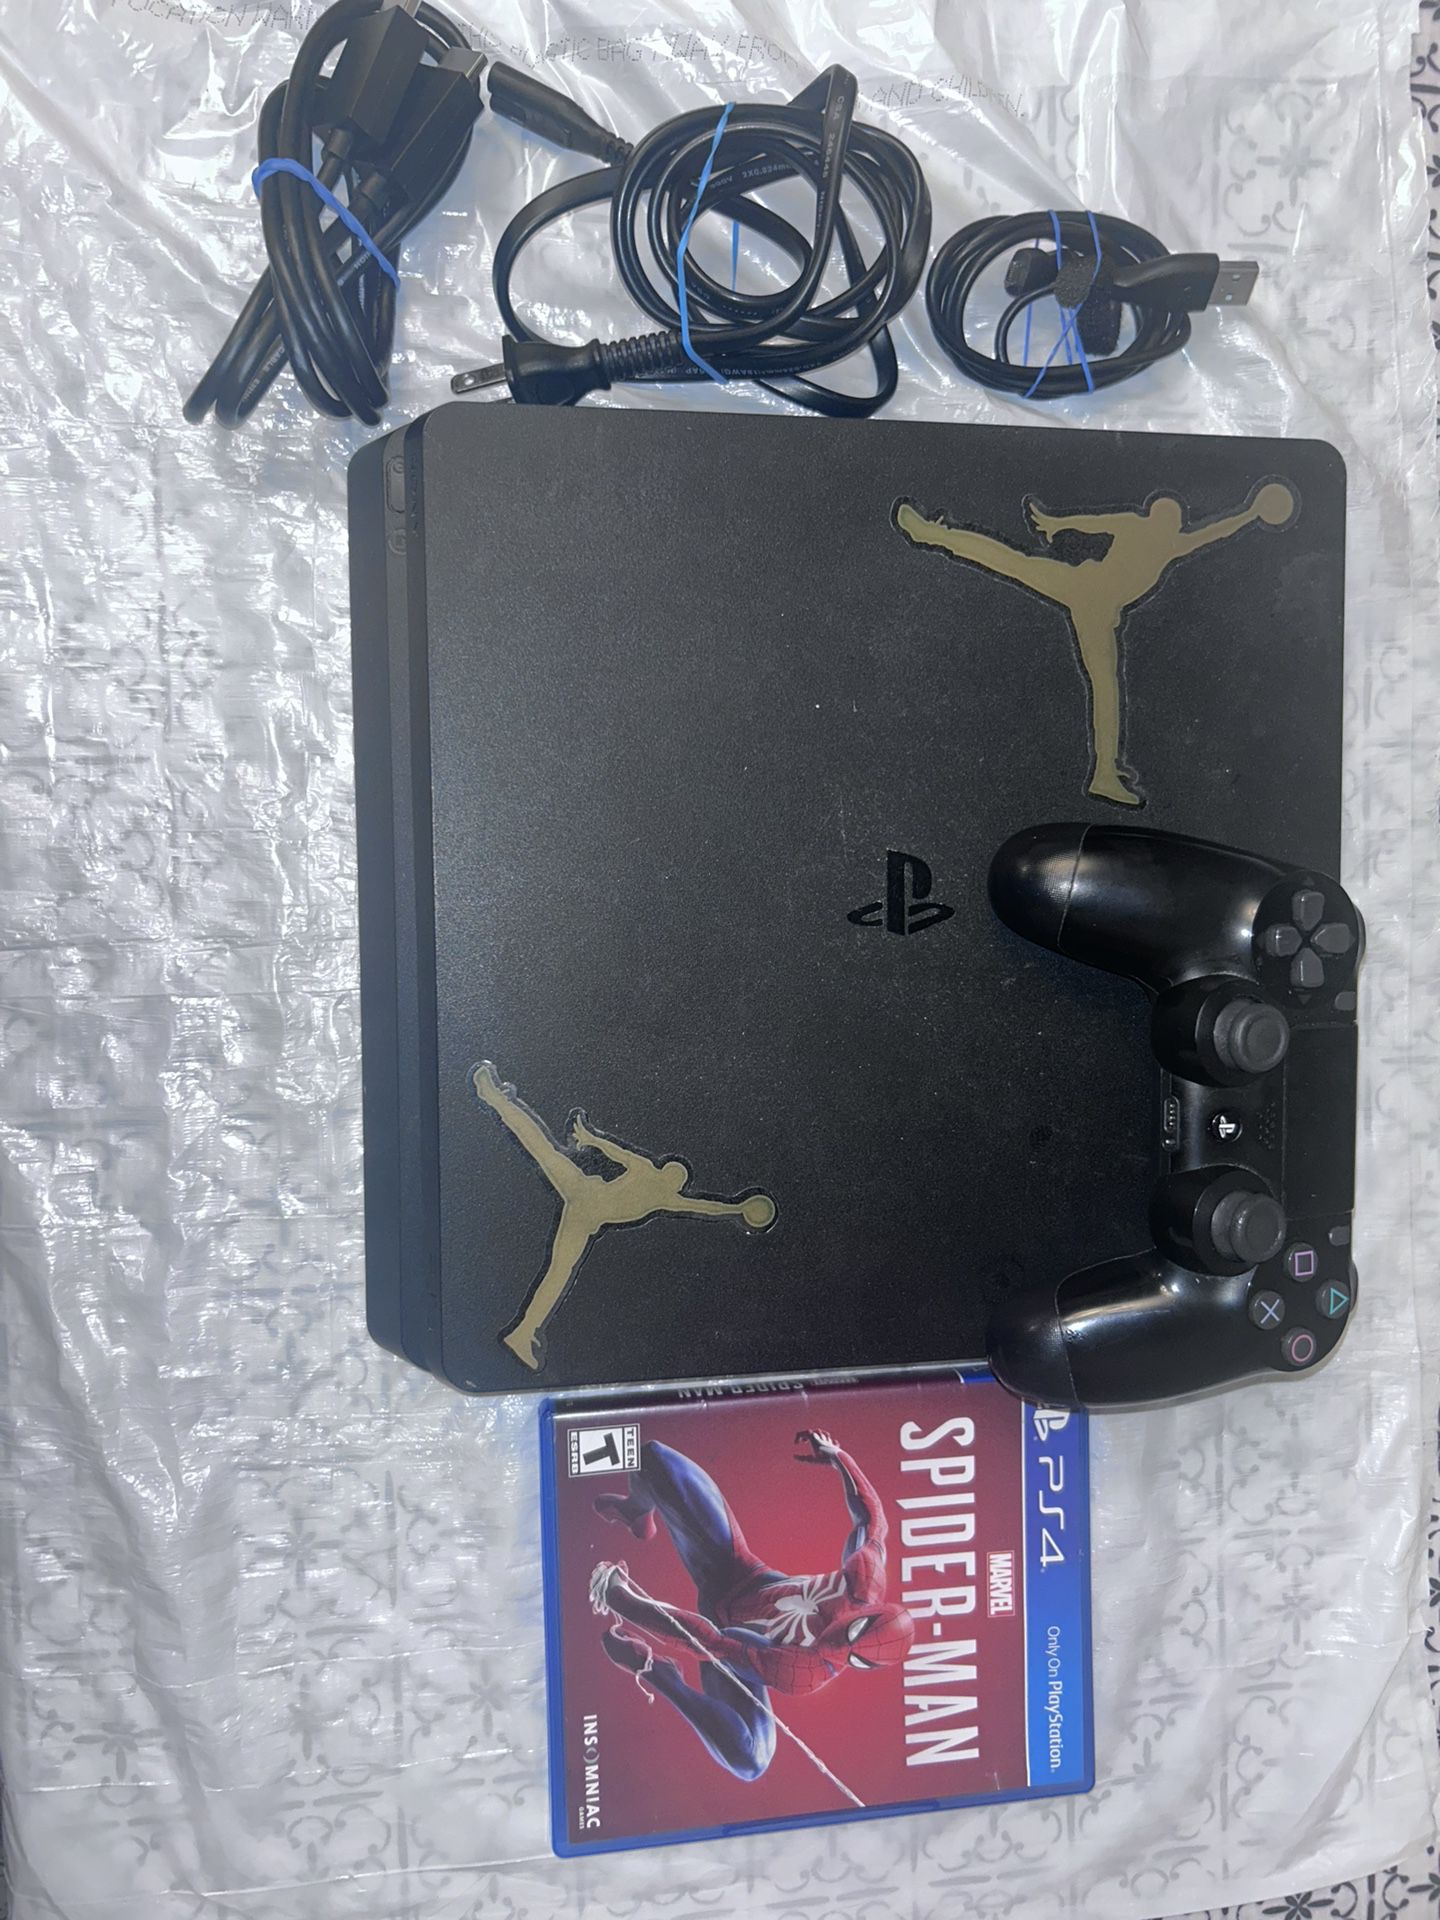 PlayStation 4 Sony Slim 500GB Console With Spider-Man Game